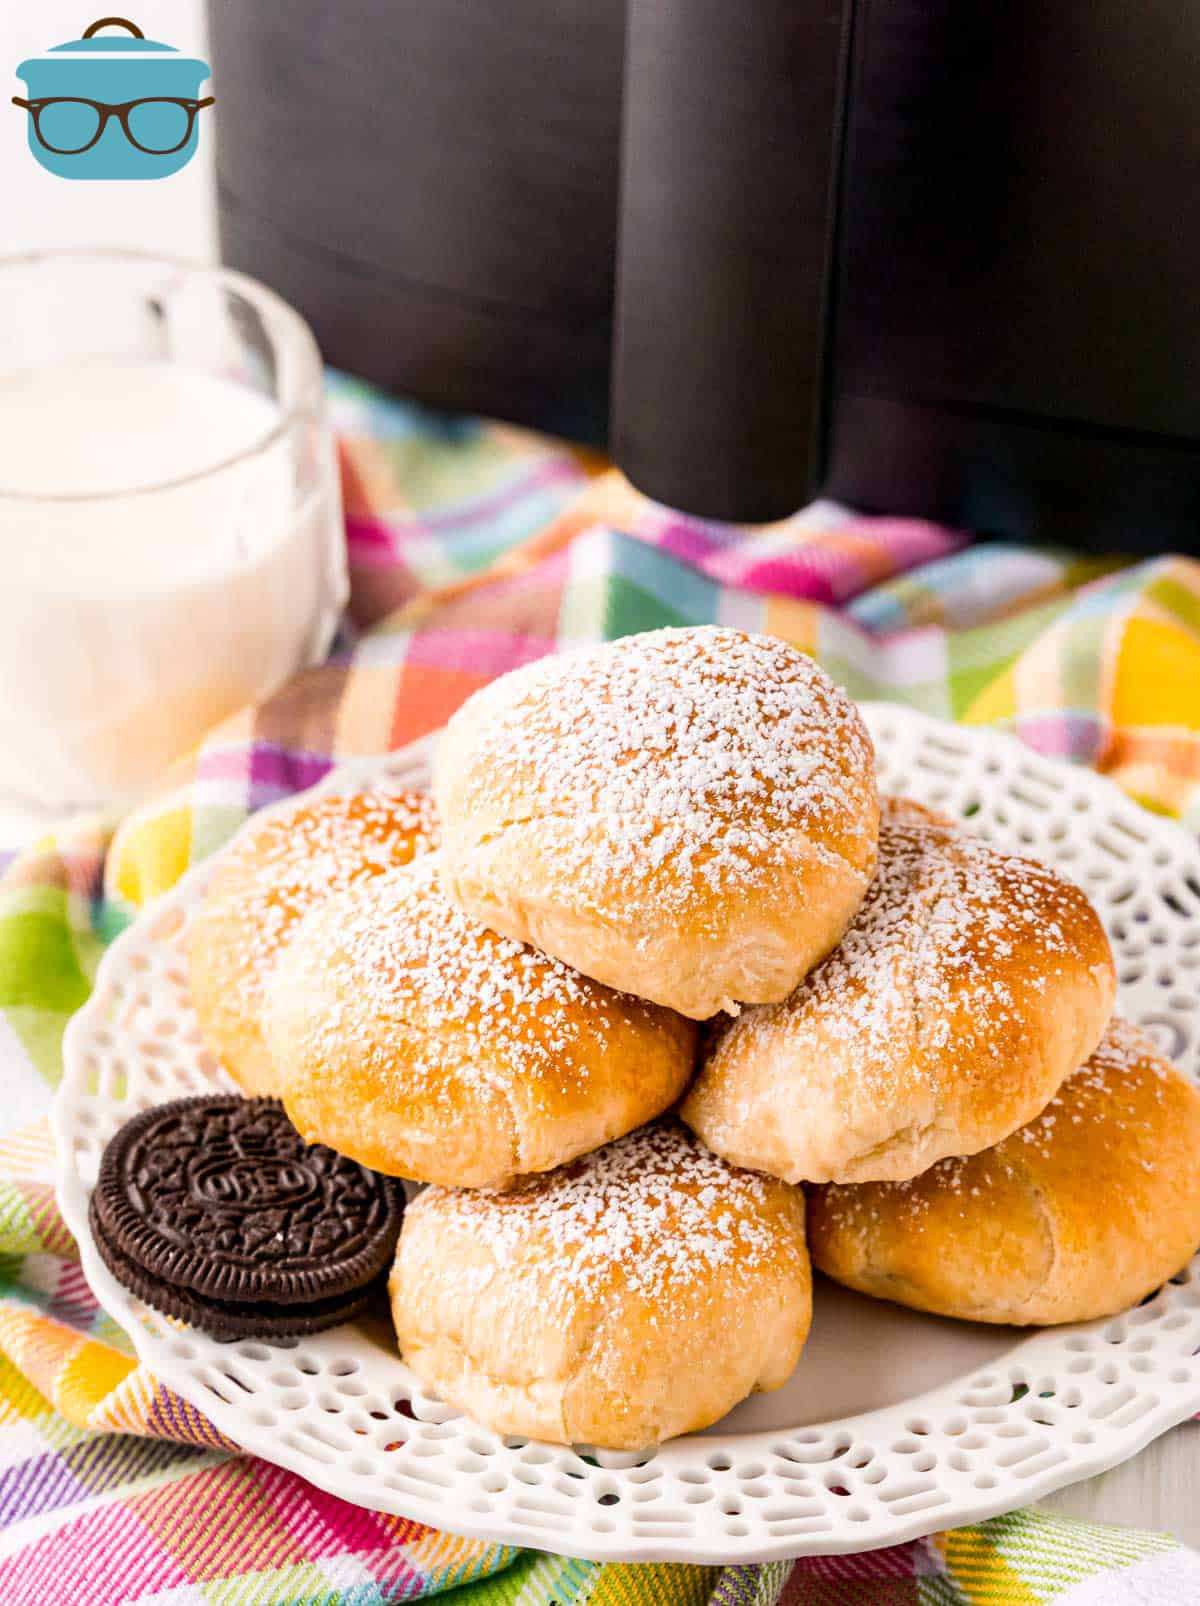 Air Fryer Fried Oreo Recipe stacked on plate topped with powdered sugar with milk next to plate.